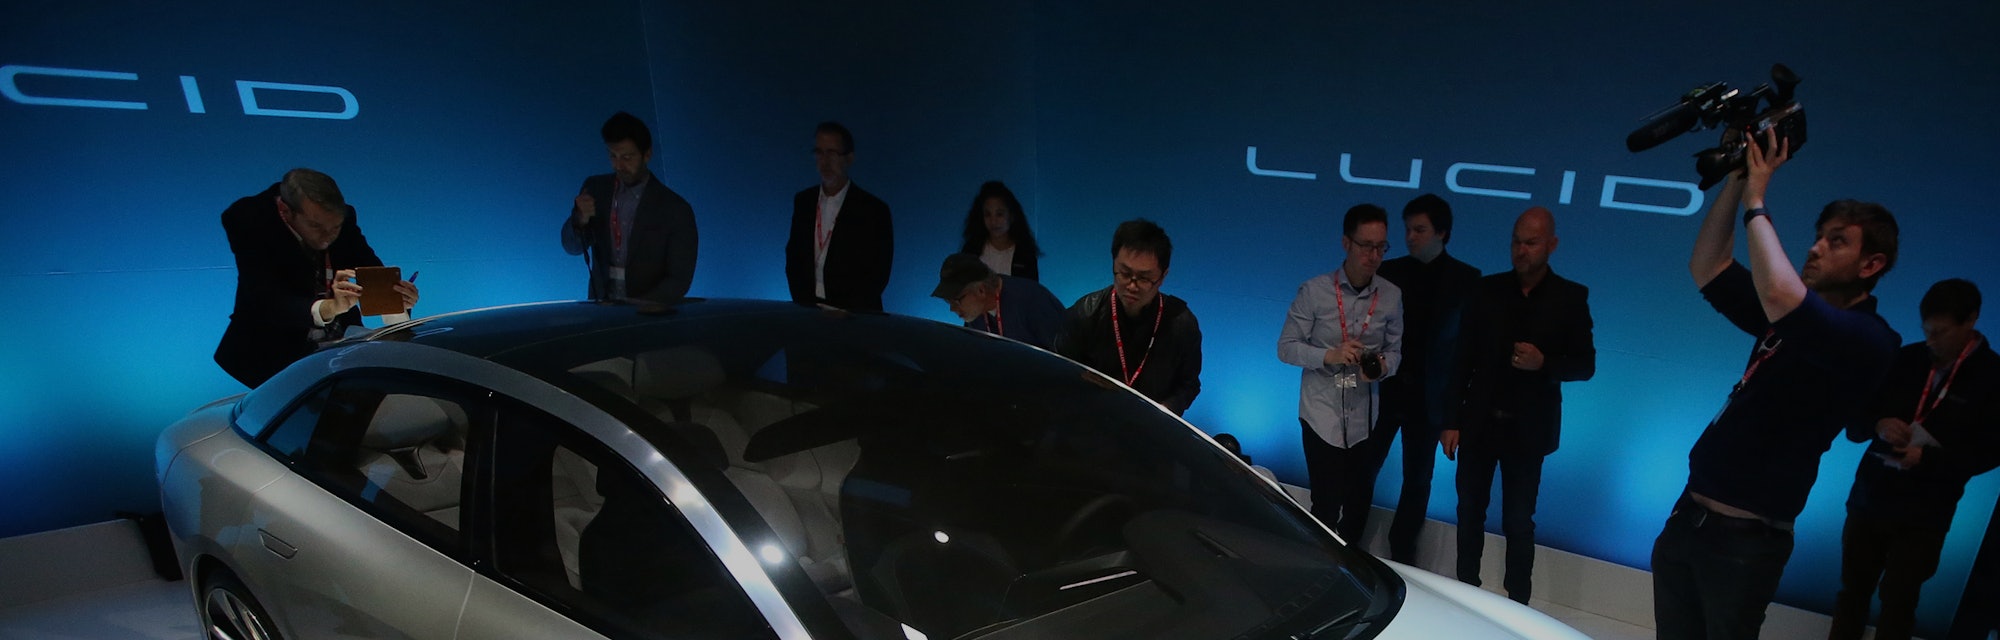 Journalists look over the new "air" electric car by Lucid Motors Inc. on Wednesday, Dec. 14, 2016, i...